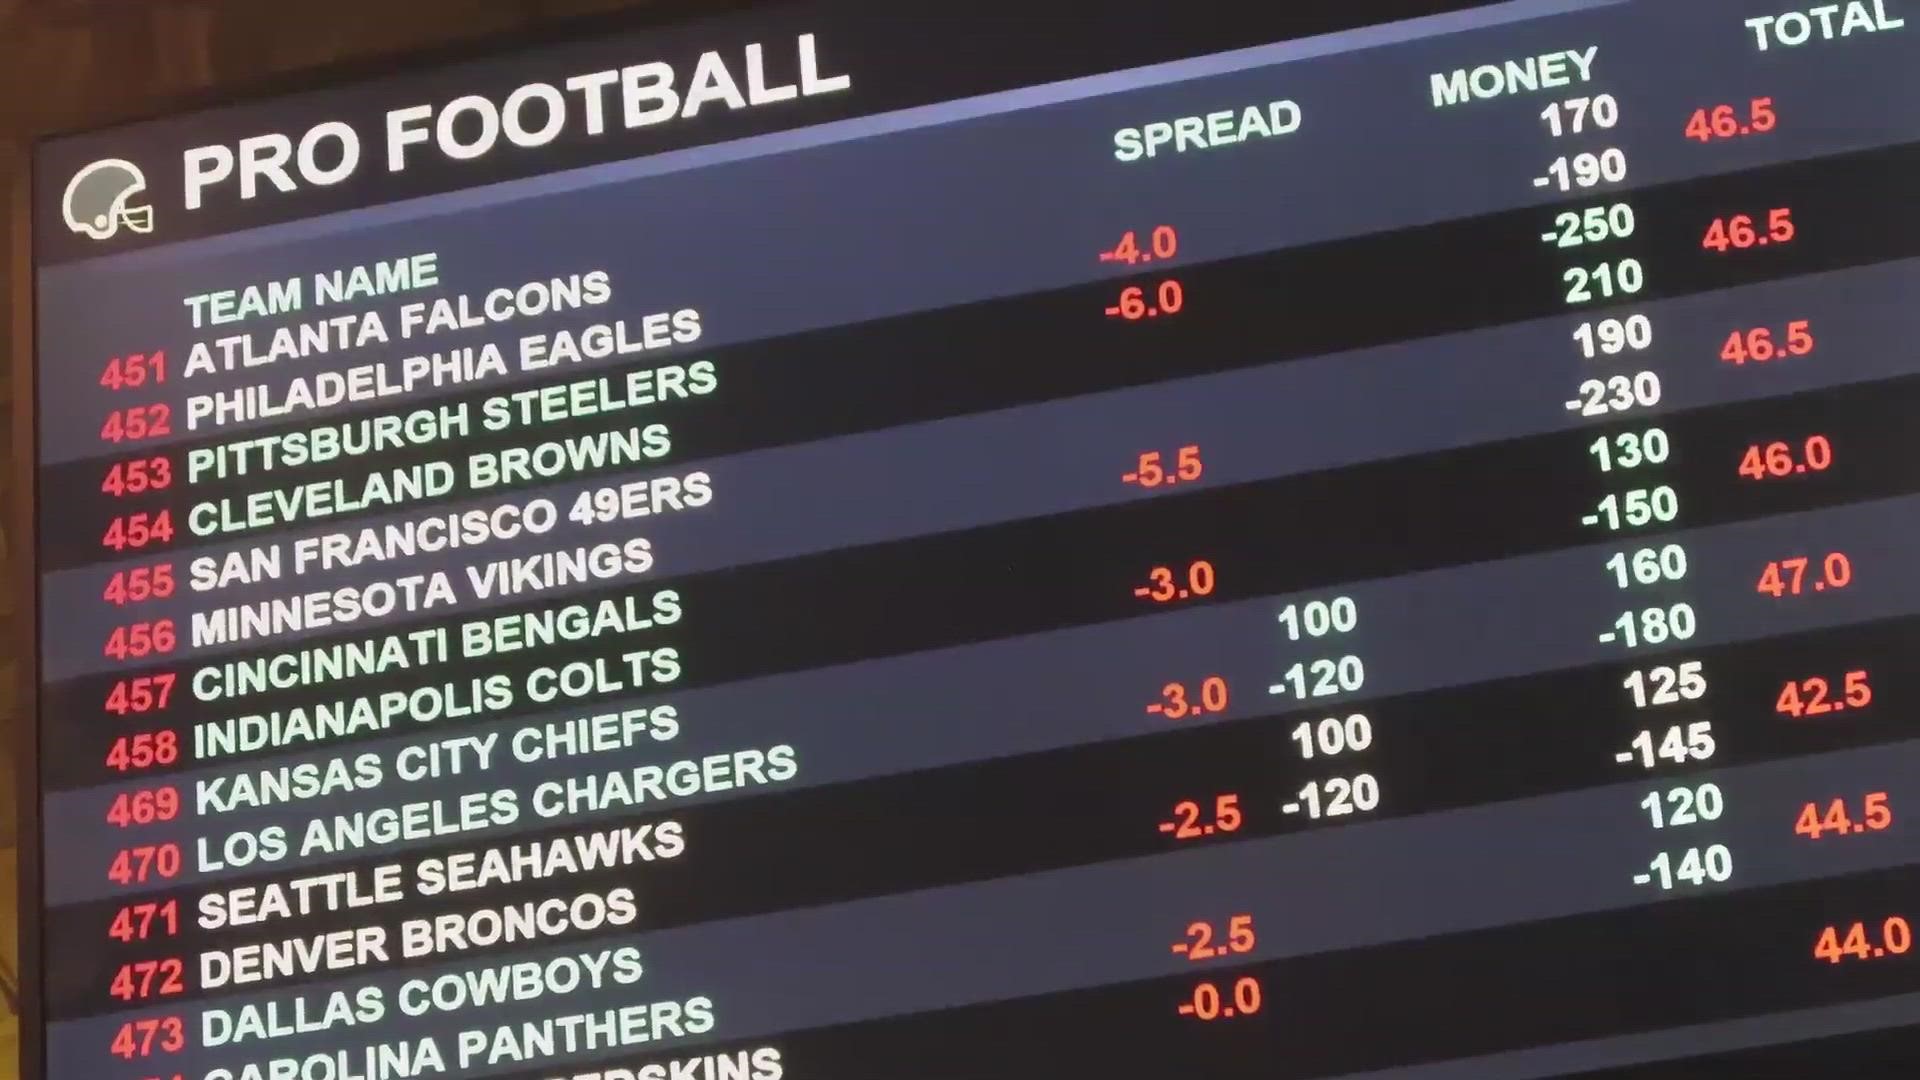 WKYC's Nick Camino and Ben Axelrod return to give their picks against the spread for Week 4 of the college football season and Week 3 of the NFL.